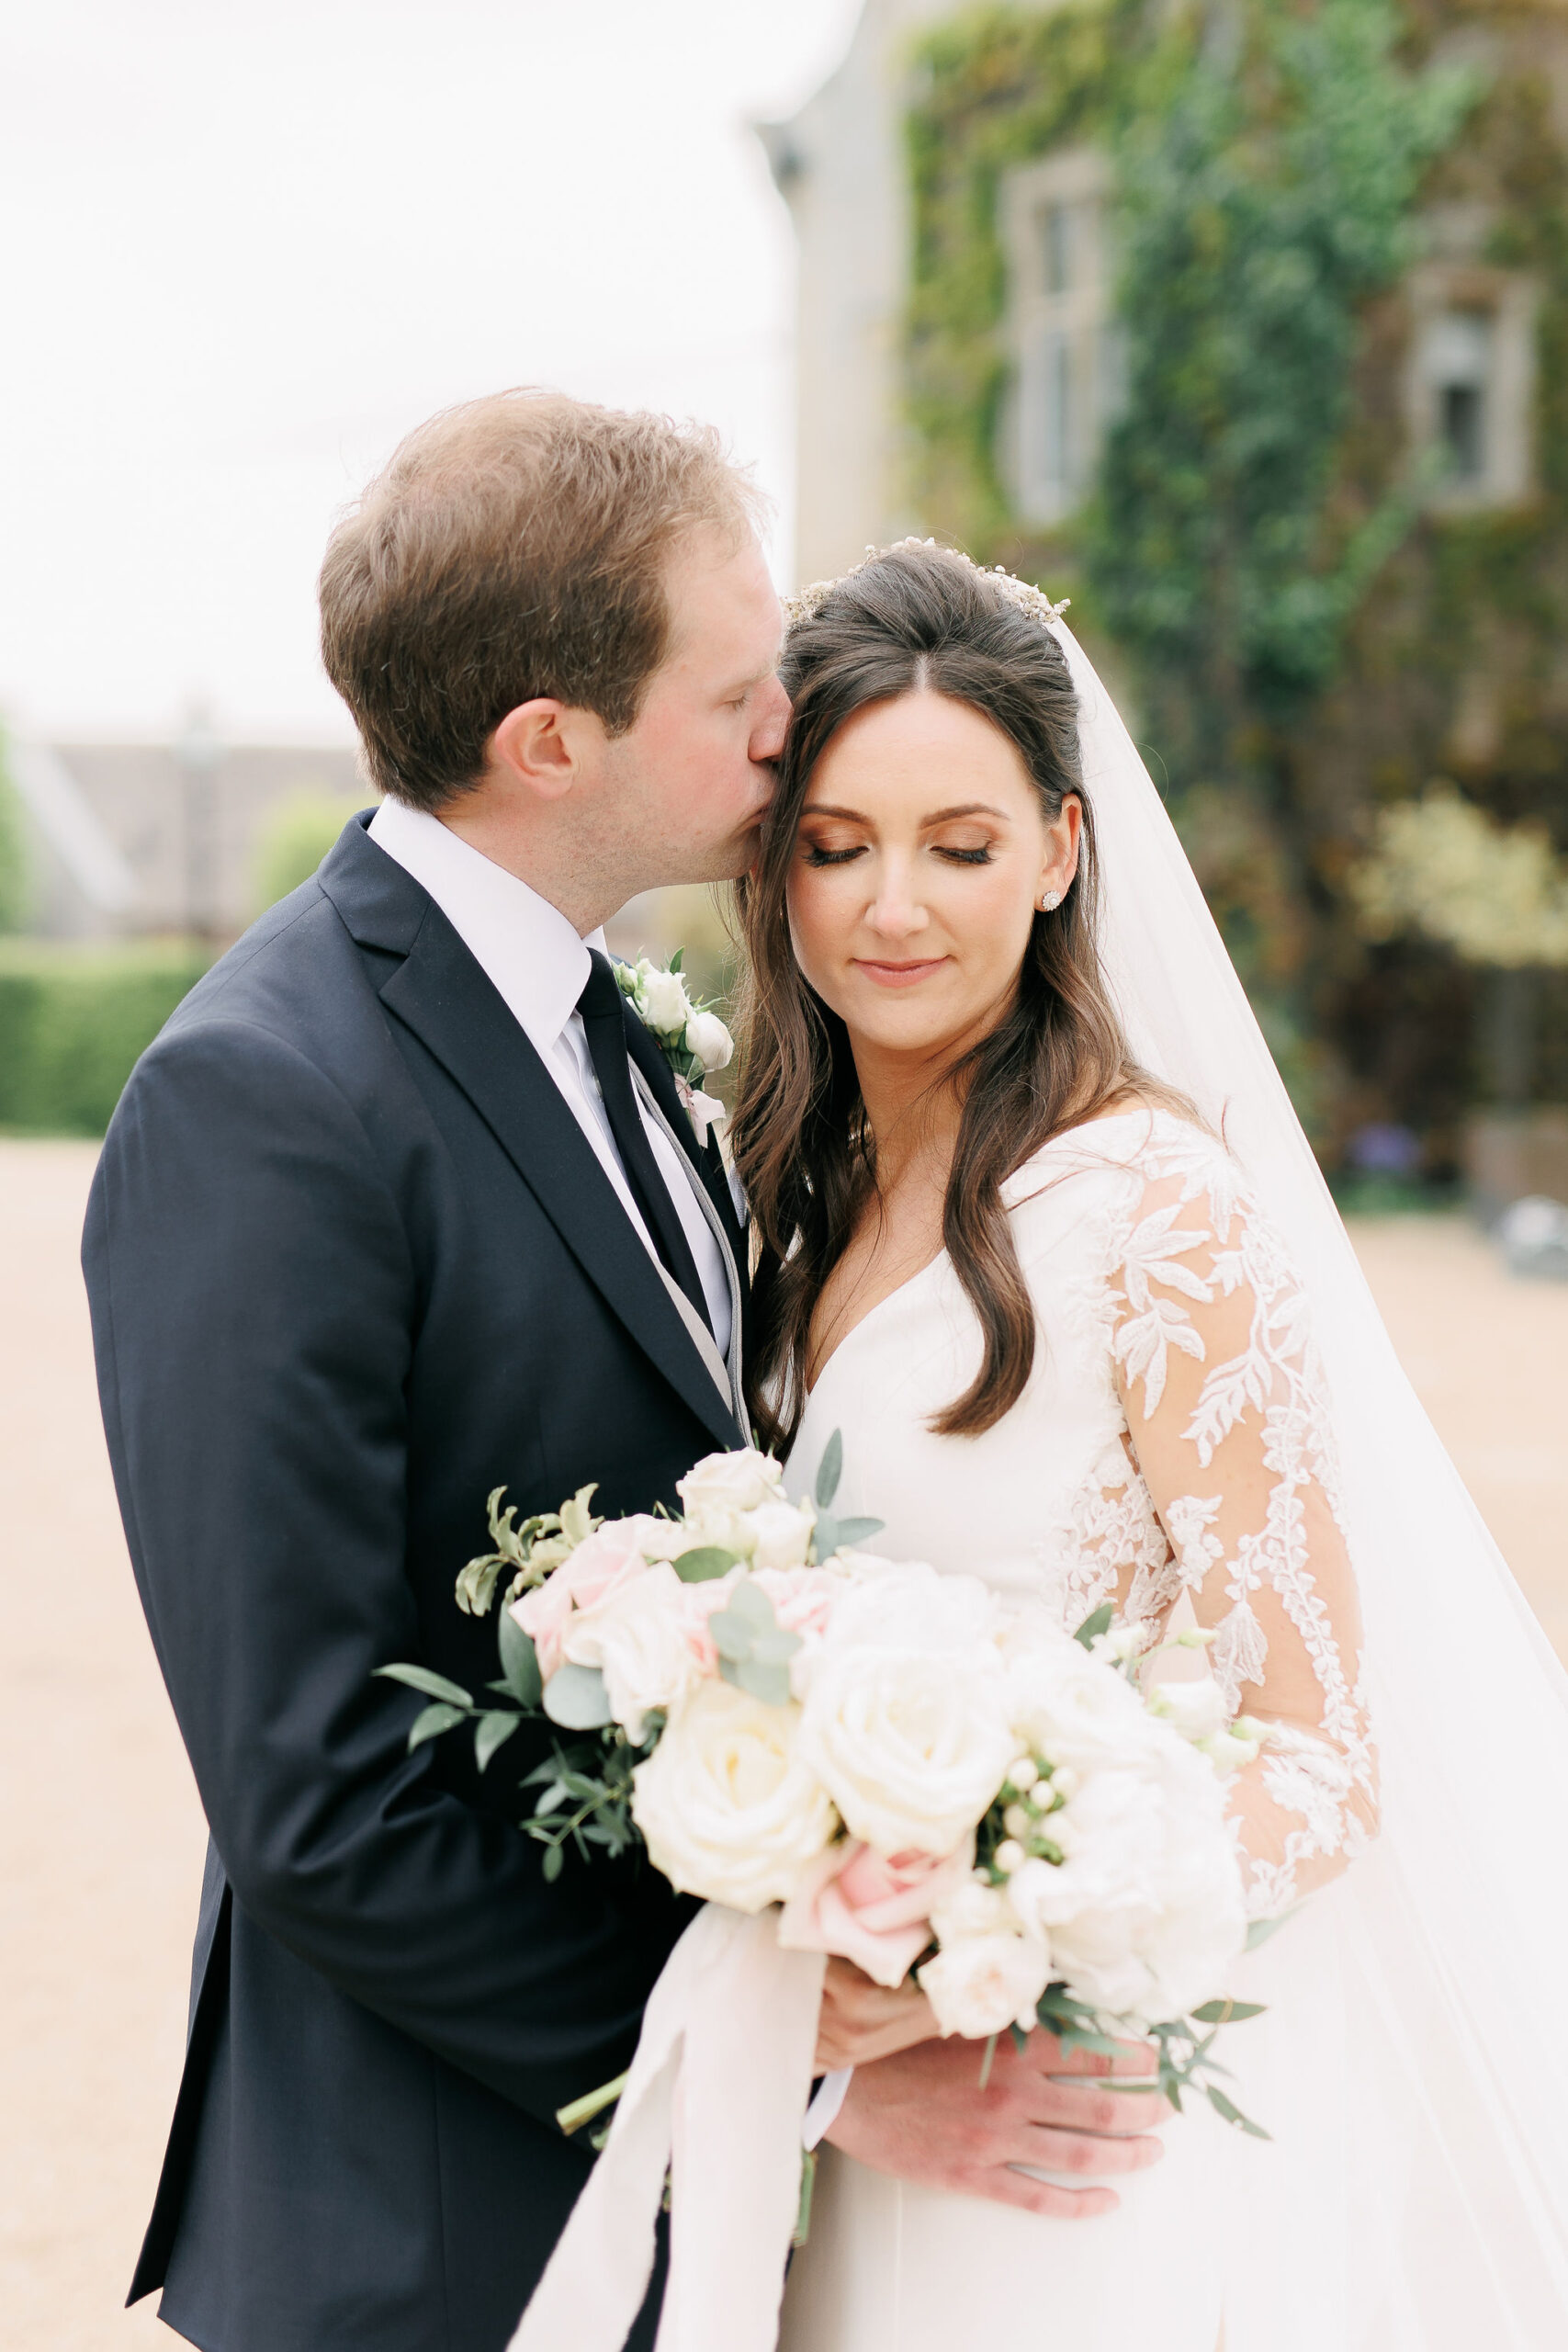 Hyde House Cotswolds wedding venue with wedding florist Flourish and Grace with White Stag Weddings Photography, questions to ask your wedding florist, bouquet with white and pink roses